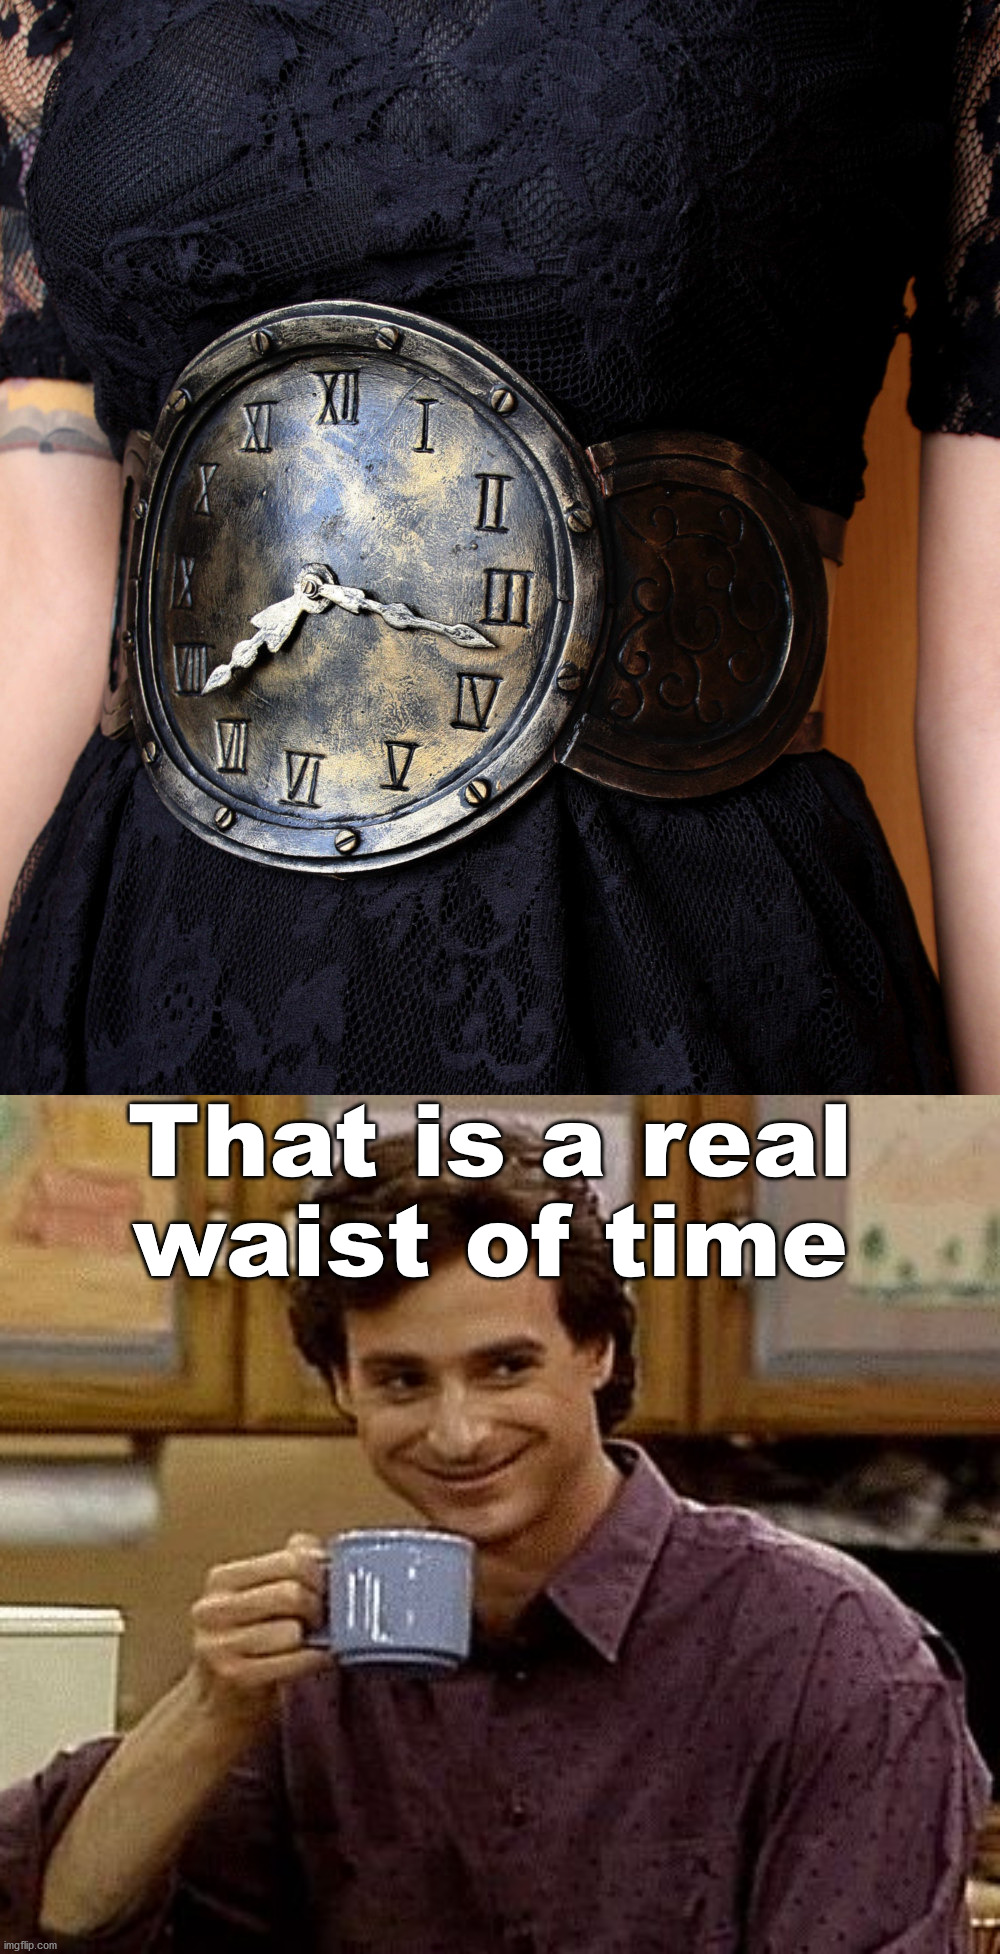 Or I ain't got time for that lady |  That is a real waist of time | image tagged in dad joke,bad pun,ain't nobody got time for that | made w/ Imgflip meme maker